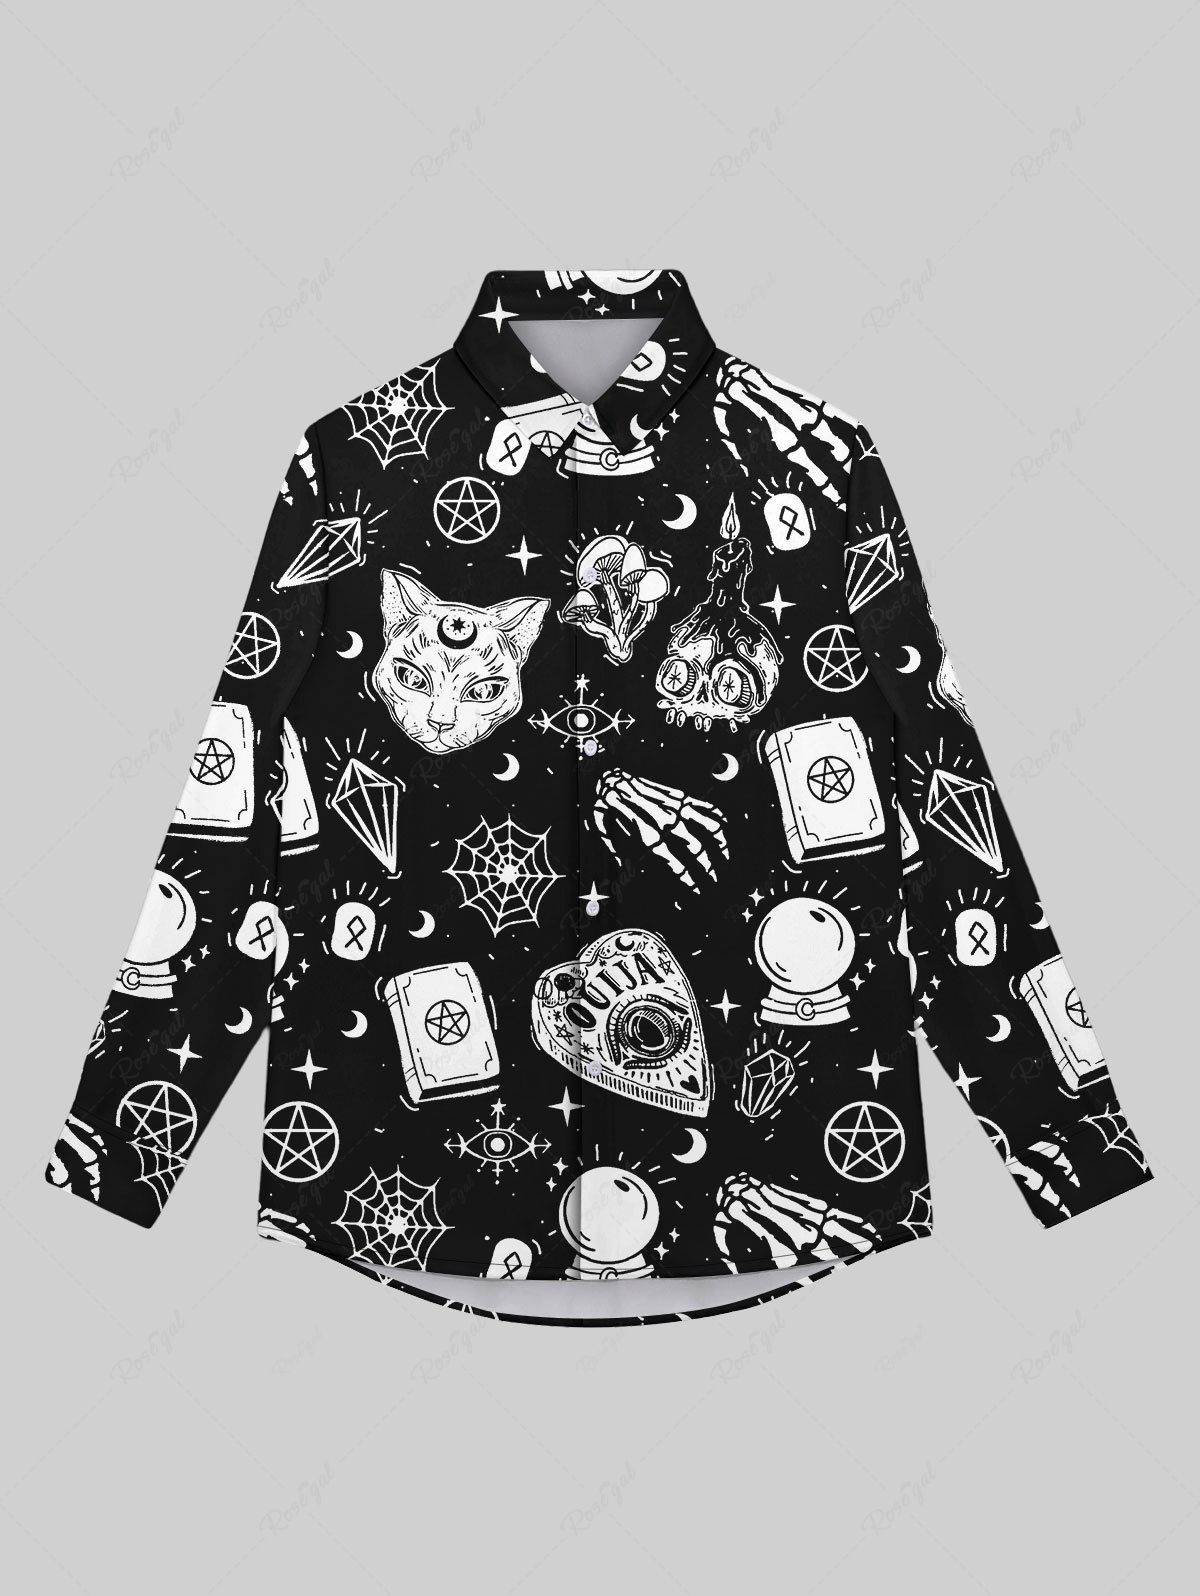 Chic Gothic Galaxy Moon Star Spider Web Skulls Candle Flame Cat Print Button Down Shirt For Men  